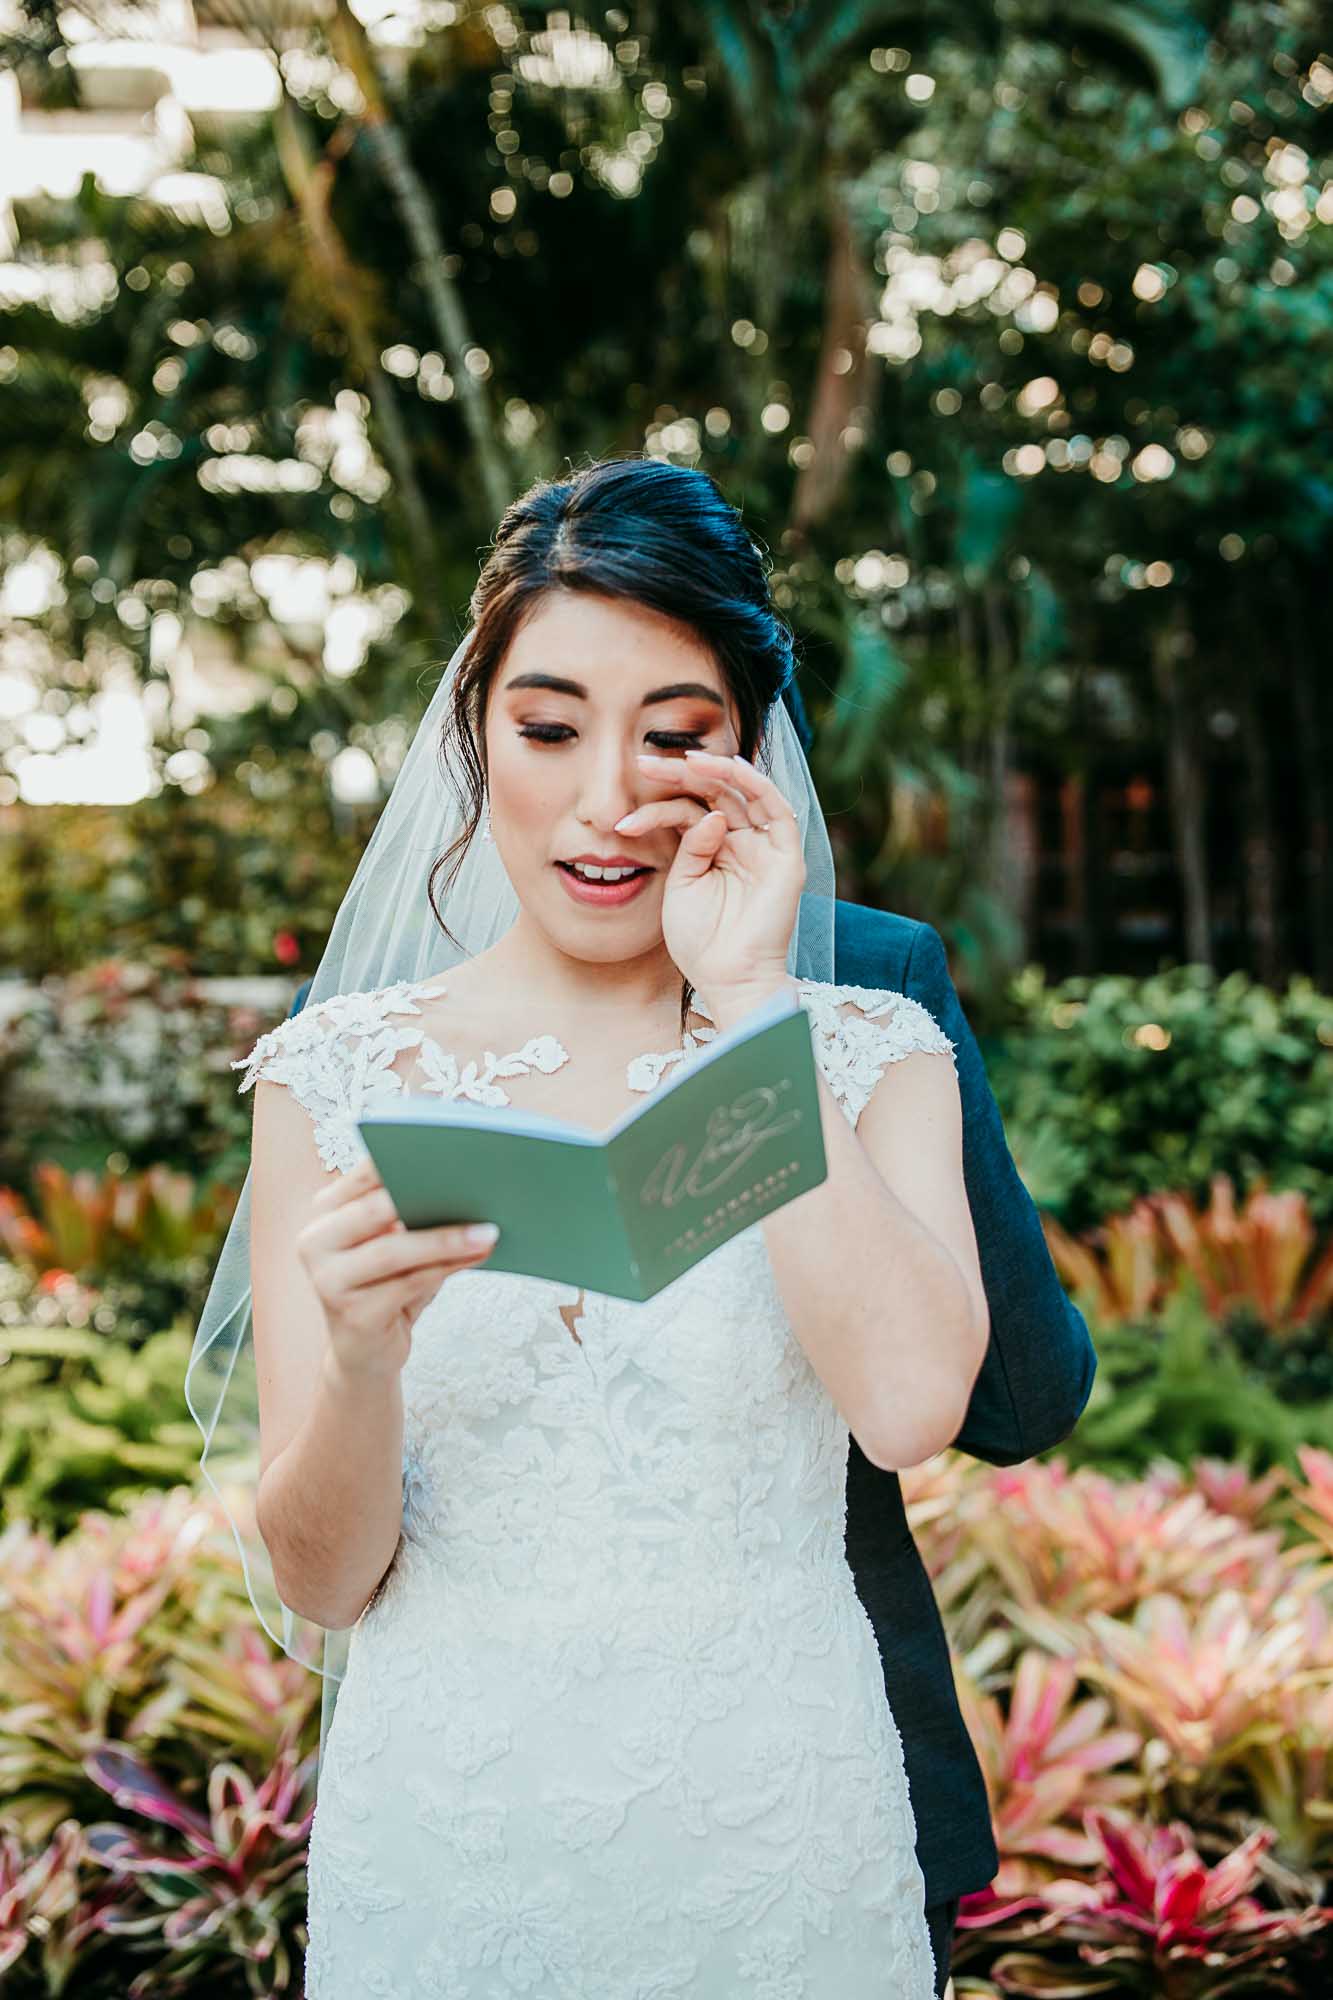 Wedding & Elopement Photographer, a bride happily tears up as she reads vows